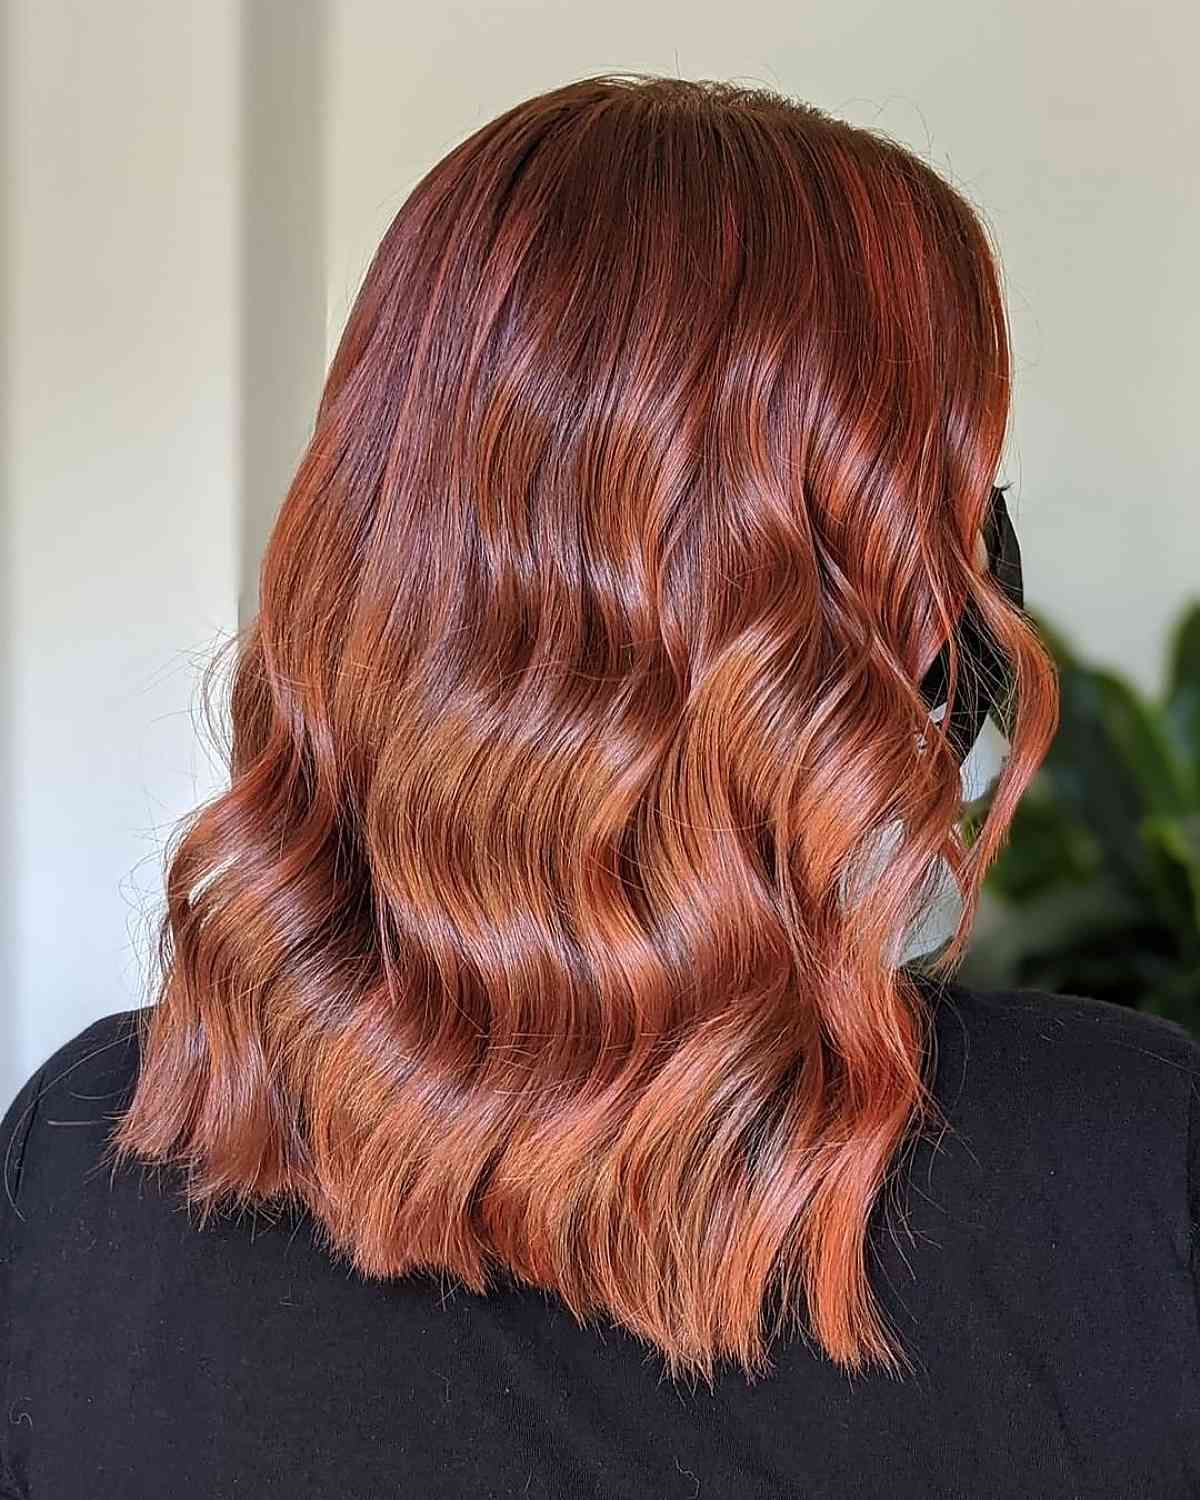 Best And Newest Copper Medium Length Hairstyles Regarding 60 Trending Copper Hair Color Ideas To Ask For In  (View 3 of 20)